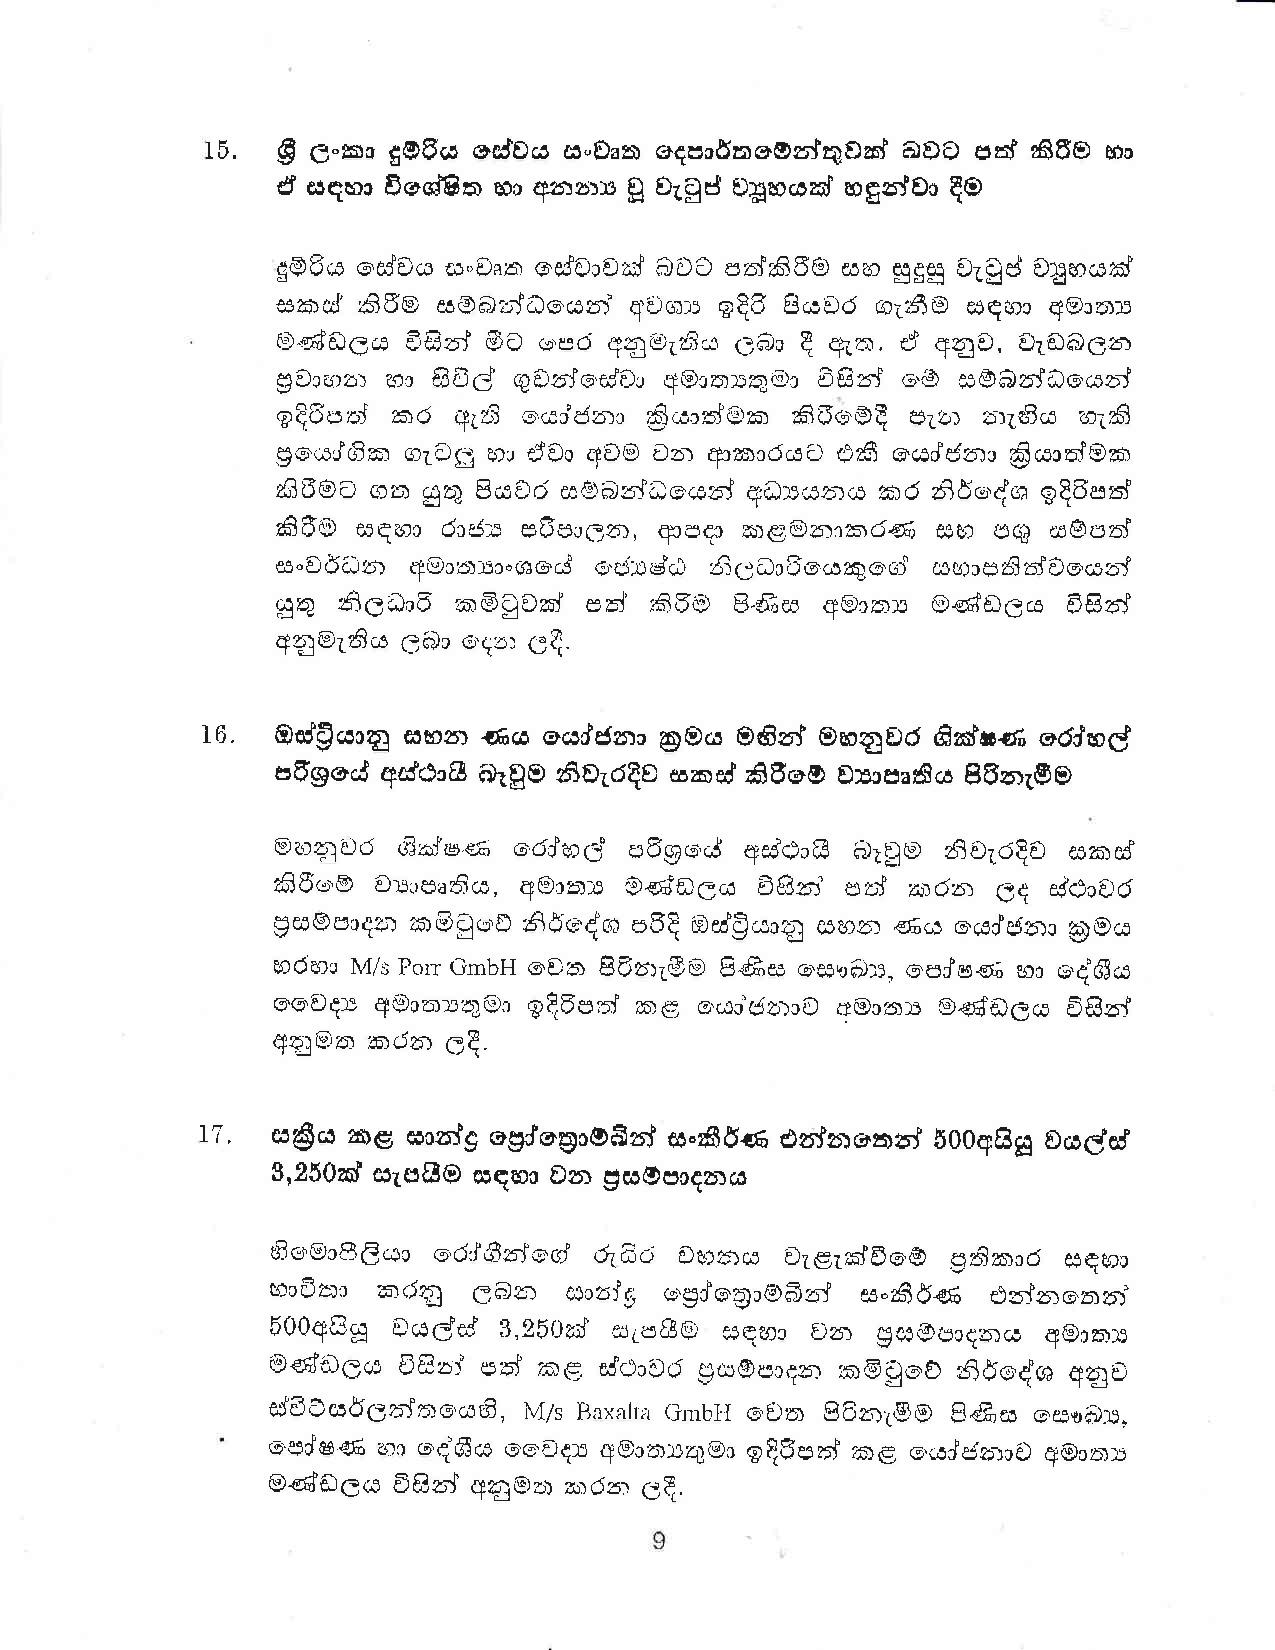 Cabinet Decision on 15.10.2019 page 009